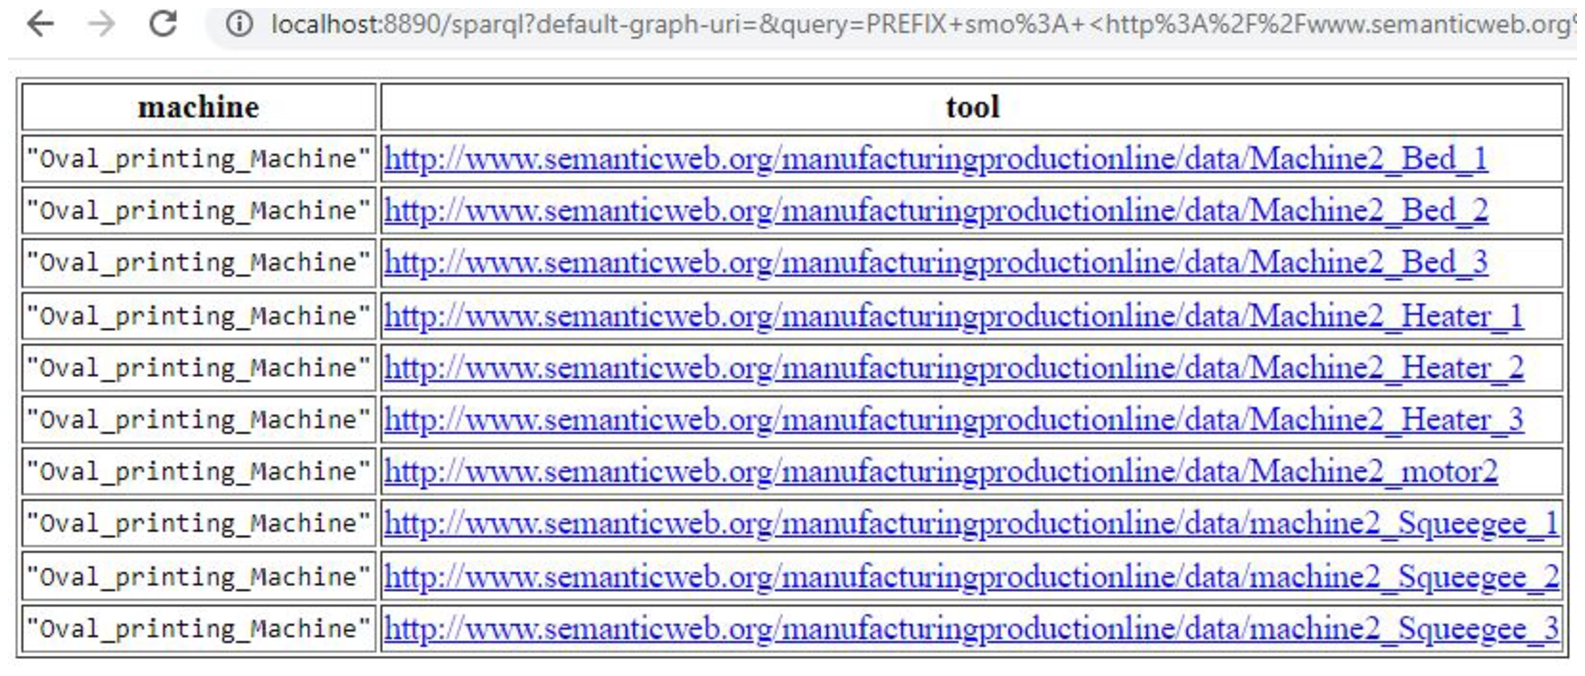 Listing 2 query provides tools hosted by machine 2.